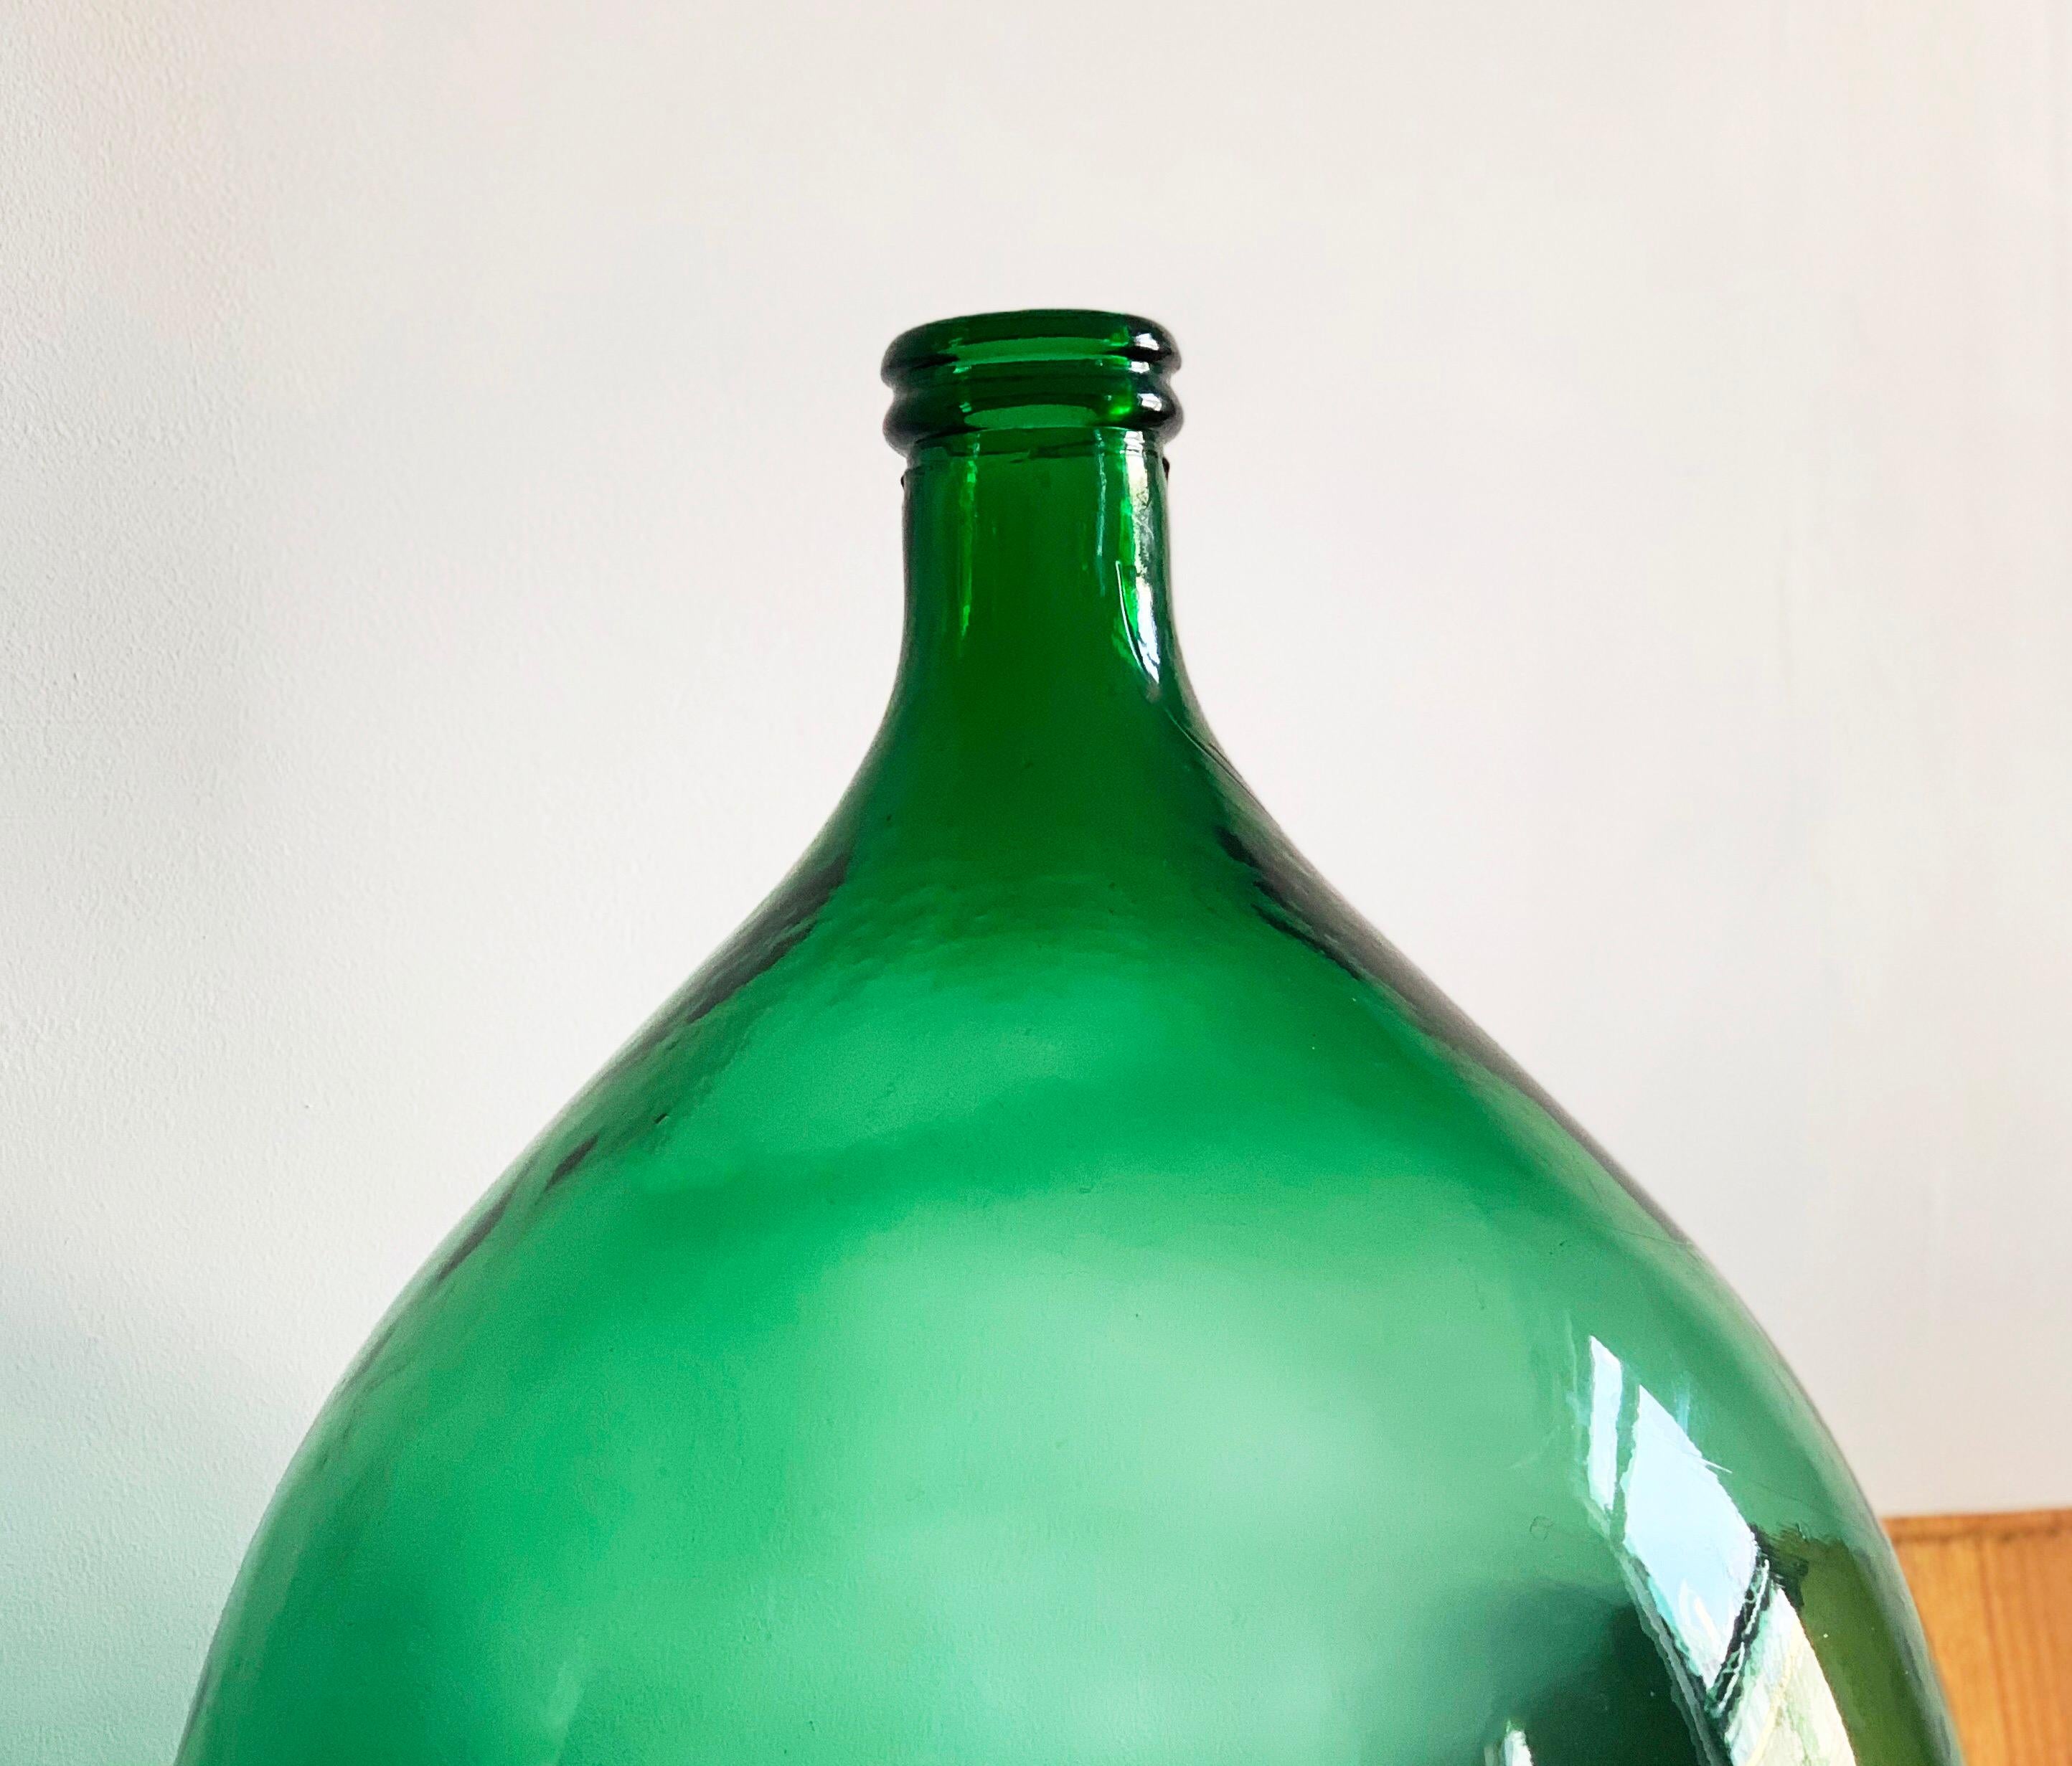 Beautiful and massive hand blown large demijohn green bottle. Early antique American blown green glass demijohn with a beautiful bold irregular sculptural form. Dates to anywhere from the late 18th-early part of the 19th century.
 
This is an Otto